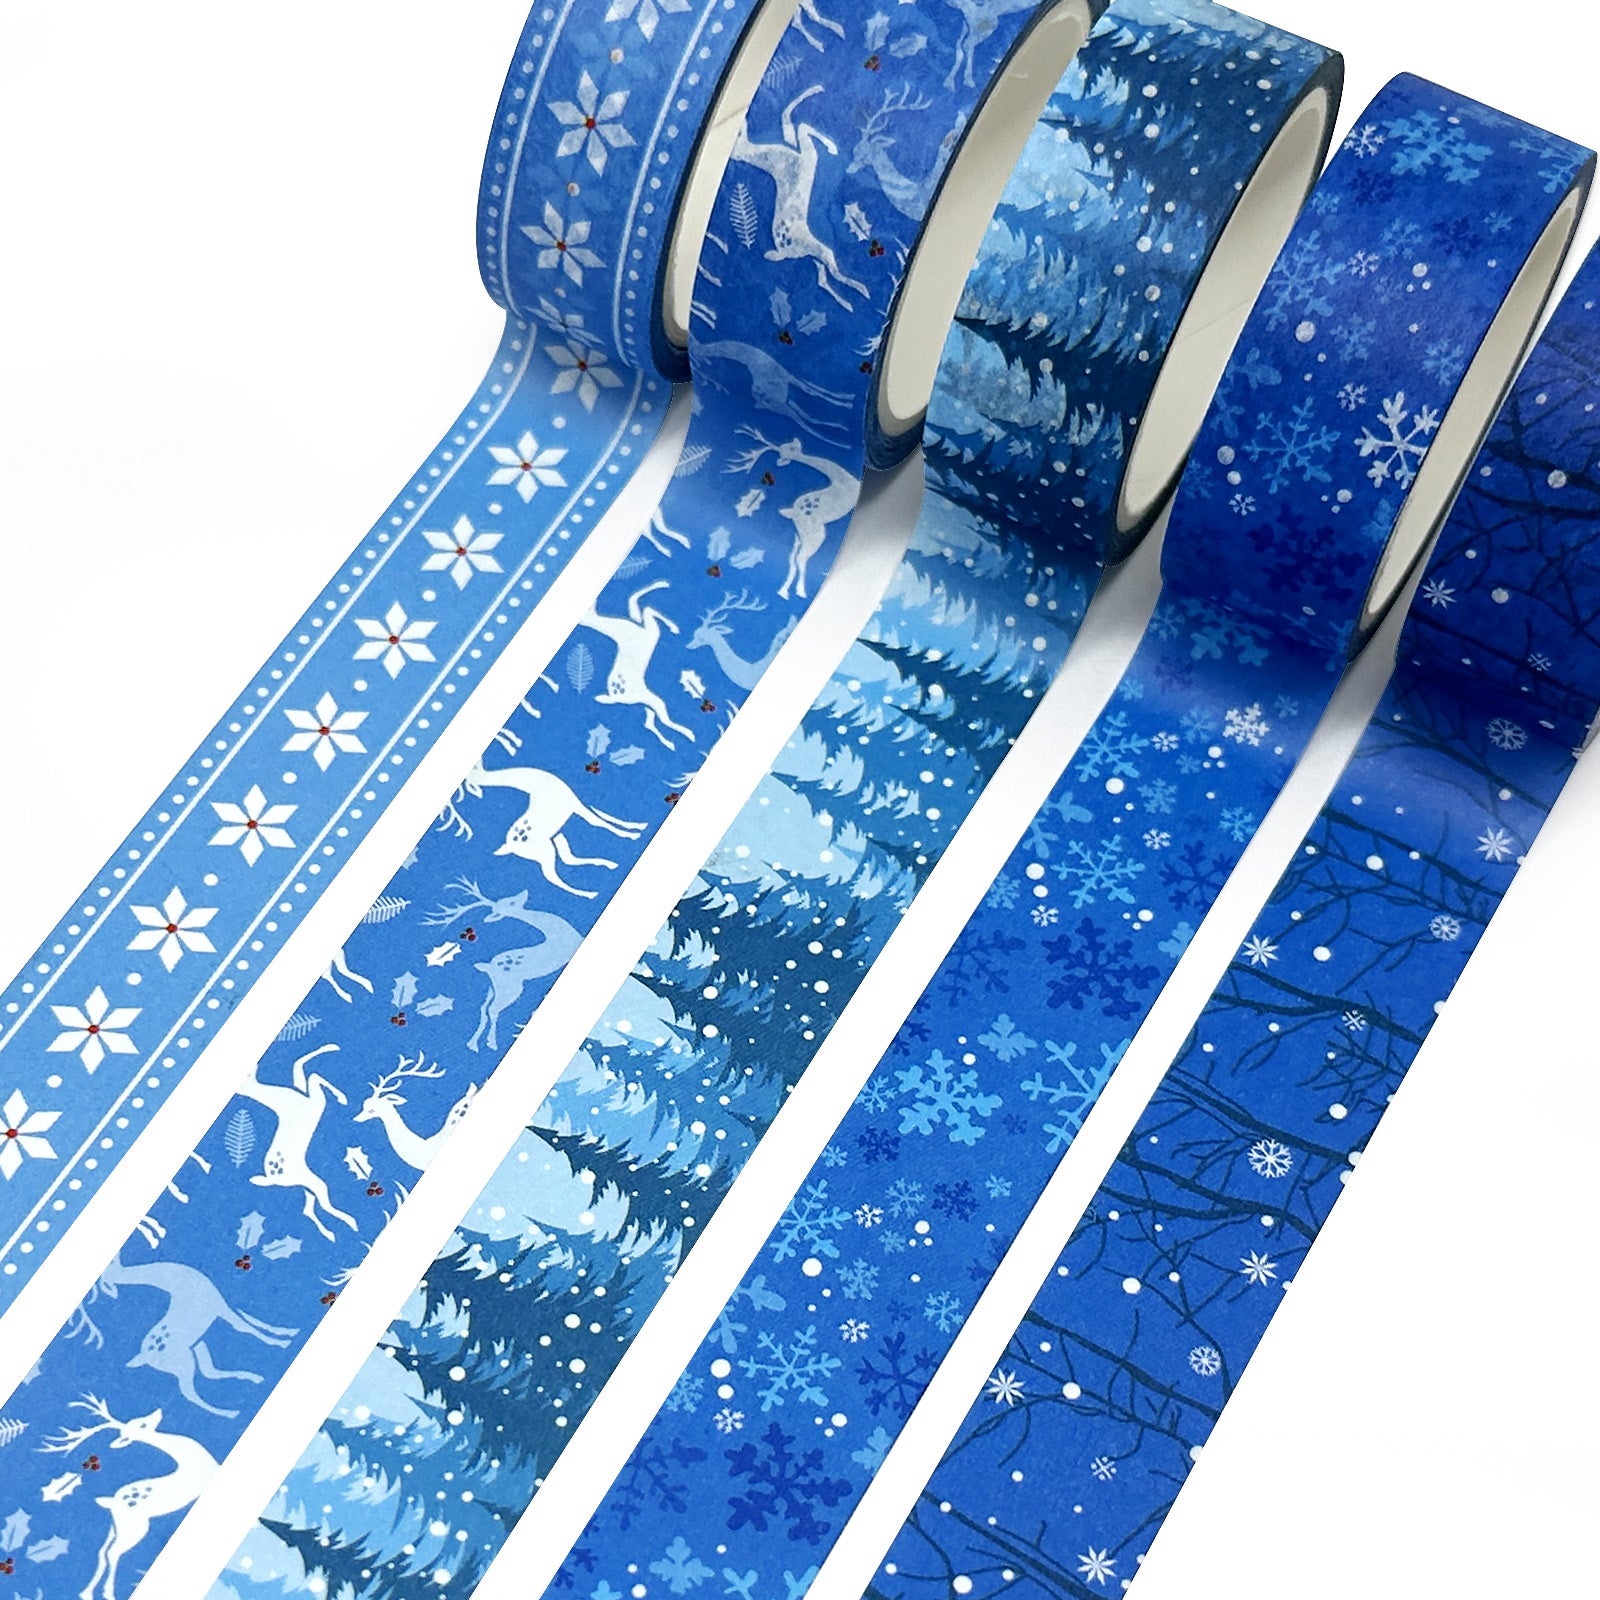 Winter PET Washi Tapes for Journaling, Scrapbooking, Planners & Crafts  Christmas, Holiday, Seasonal Stickers FAYWARE 